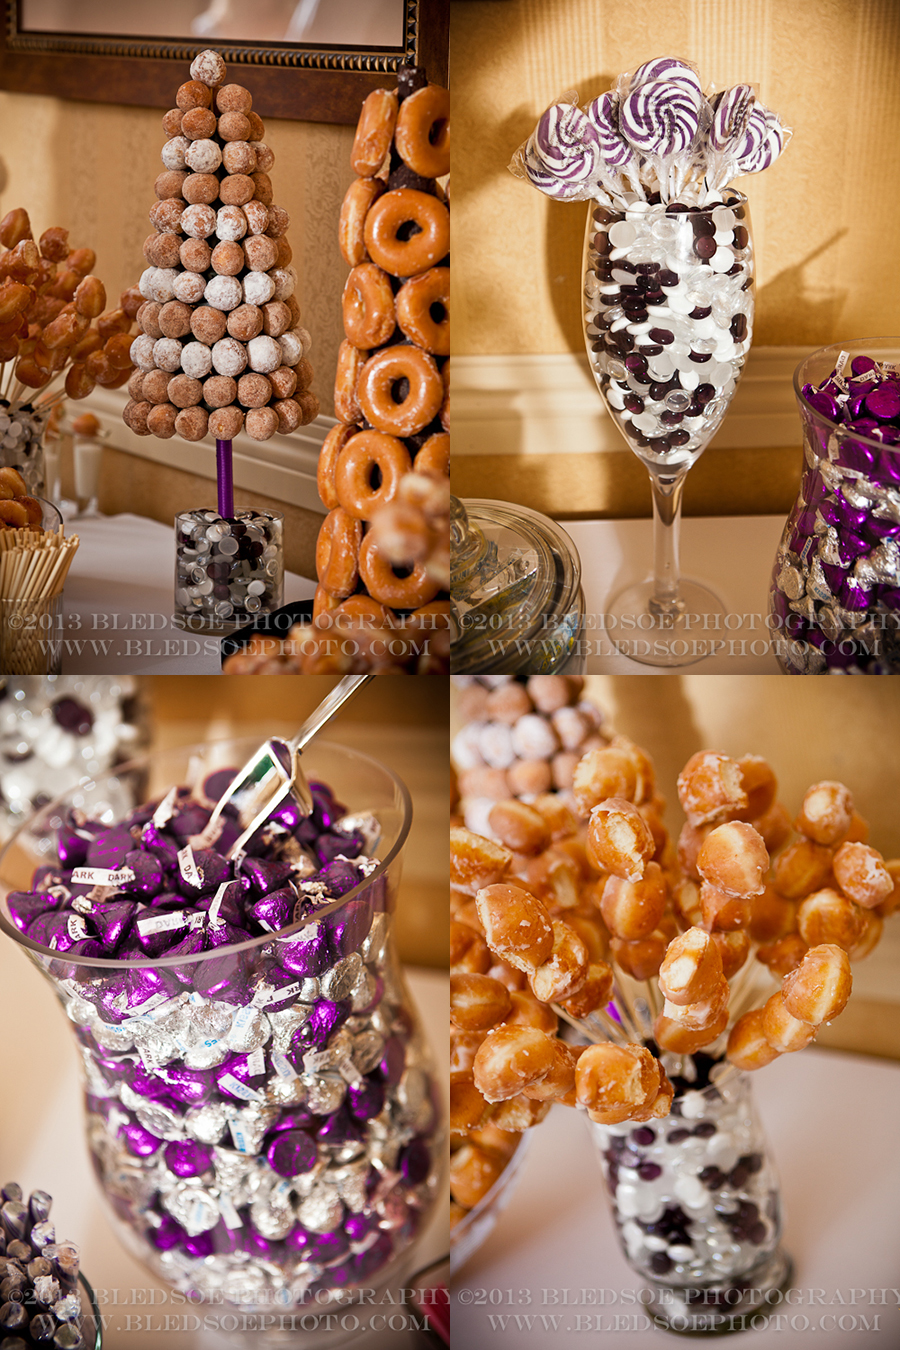 Doughnut and candy reception table, purple Hershey Kisses, doughnut holes on sticks, doughnut hole tree, downtown hilton reception, knoxville wedding photographer, ©Bledsoe Photography